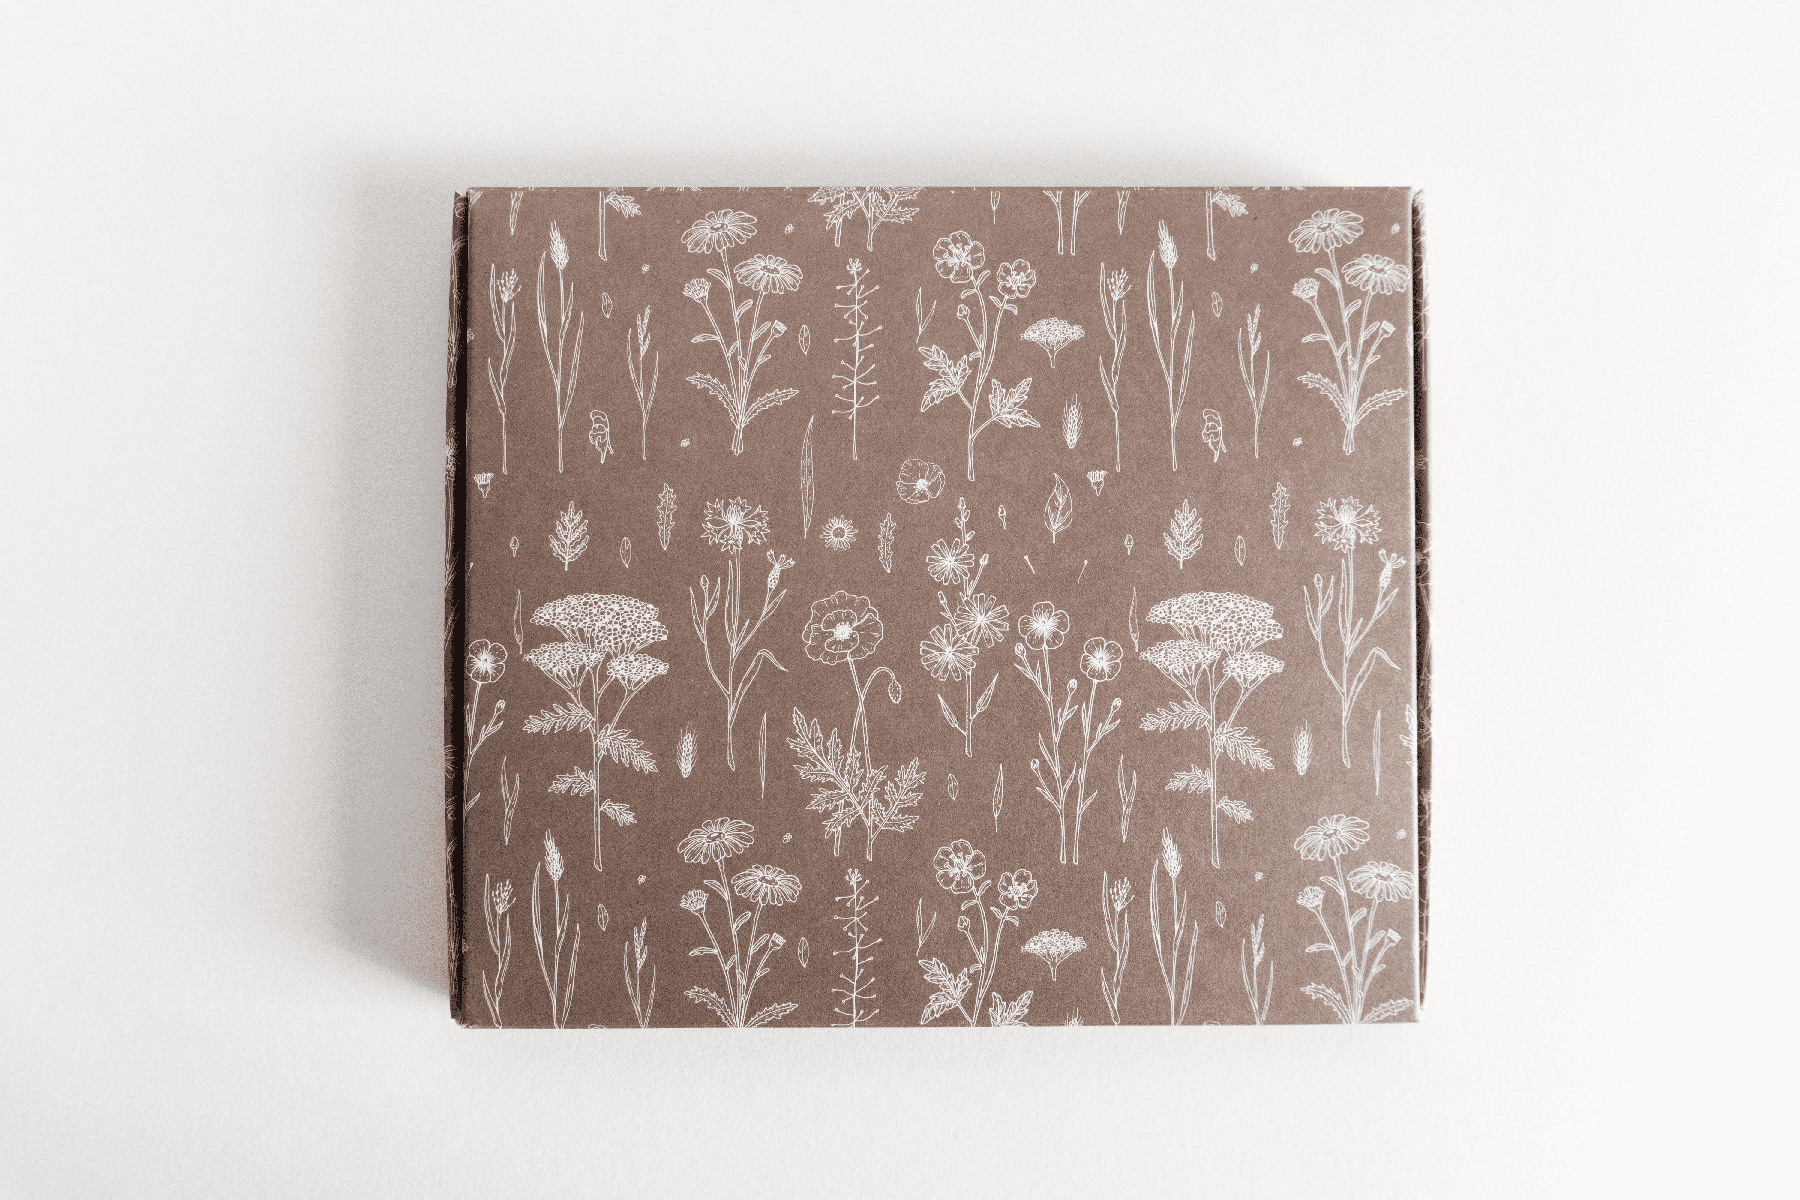 A brown ABC Box Wildflower 7" x 8" - Large notebook with a Wildflower pattern on it by impack.co.